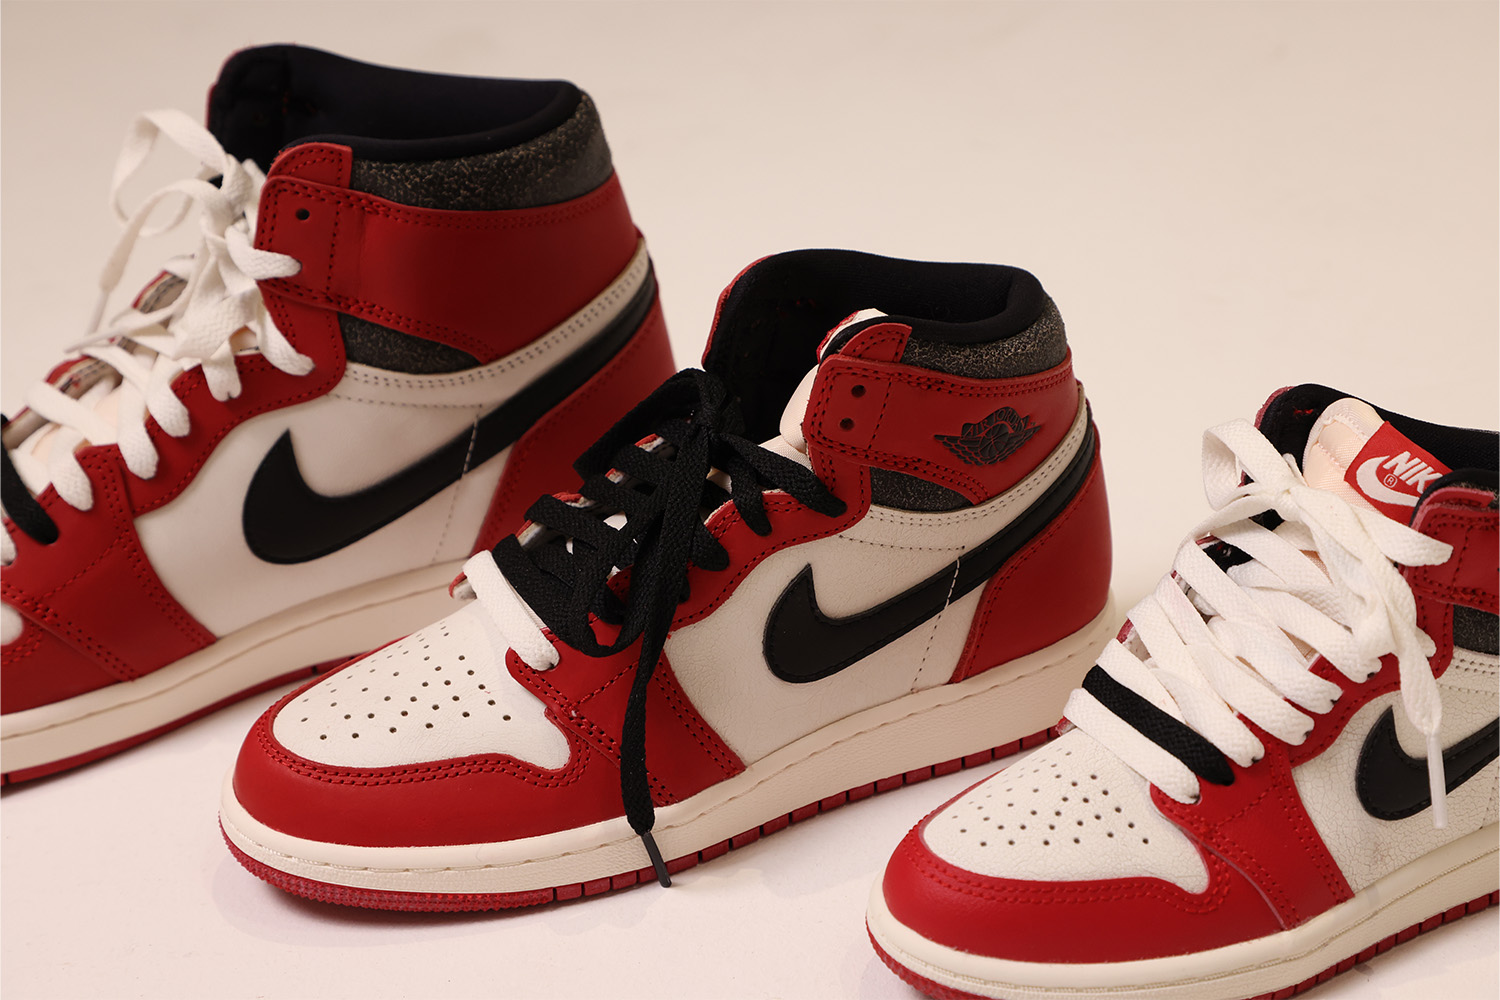 Jordan 1 Lost and Found from The Edit LDN